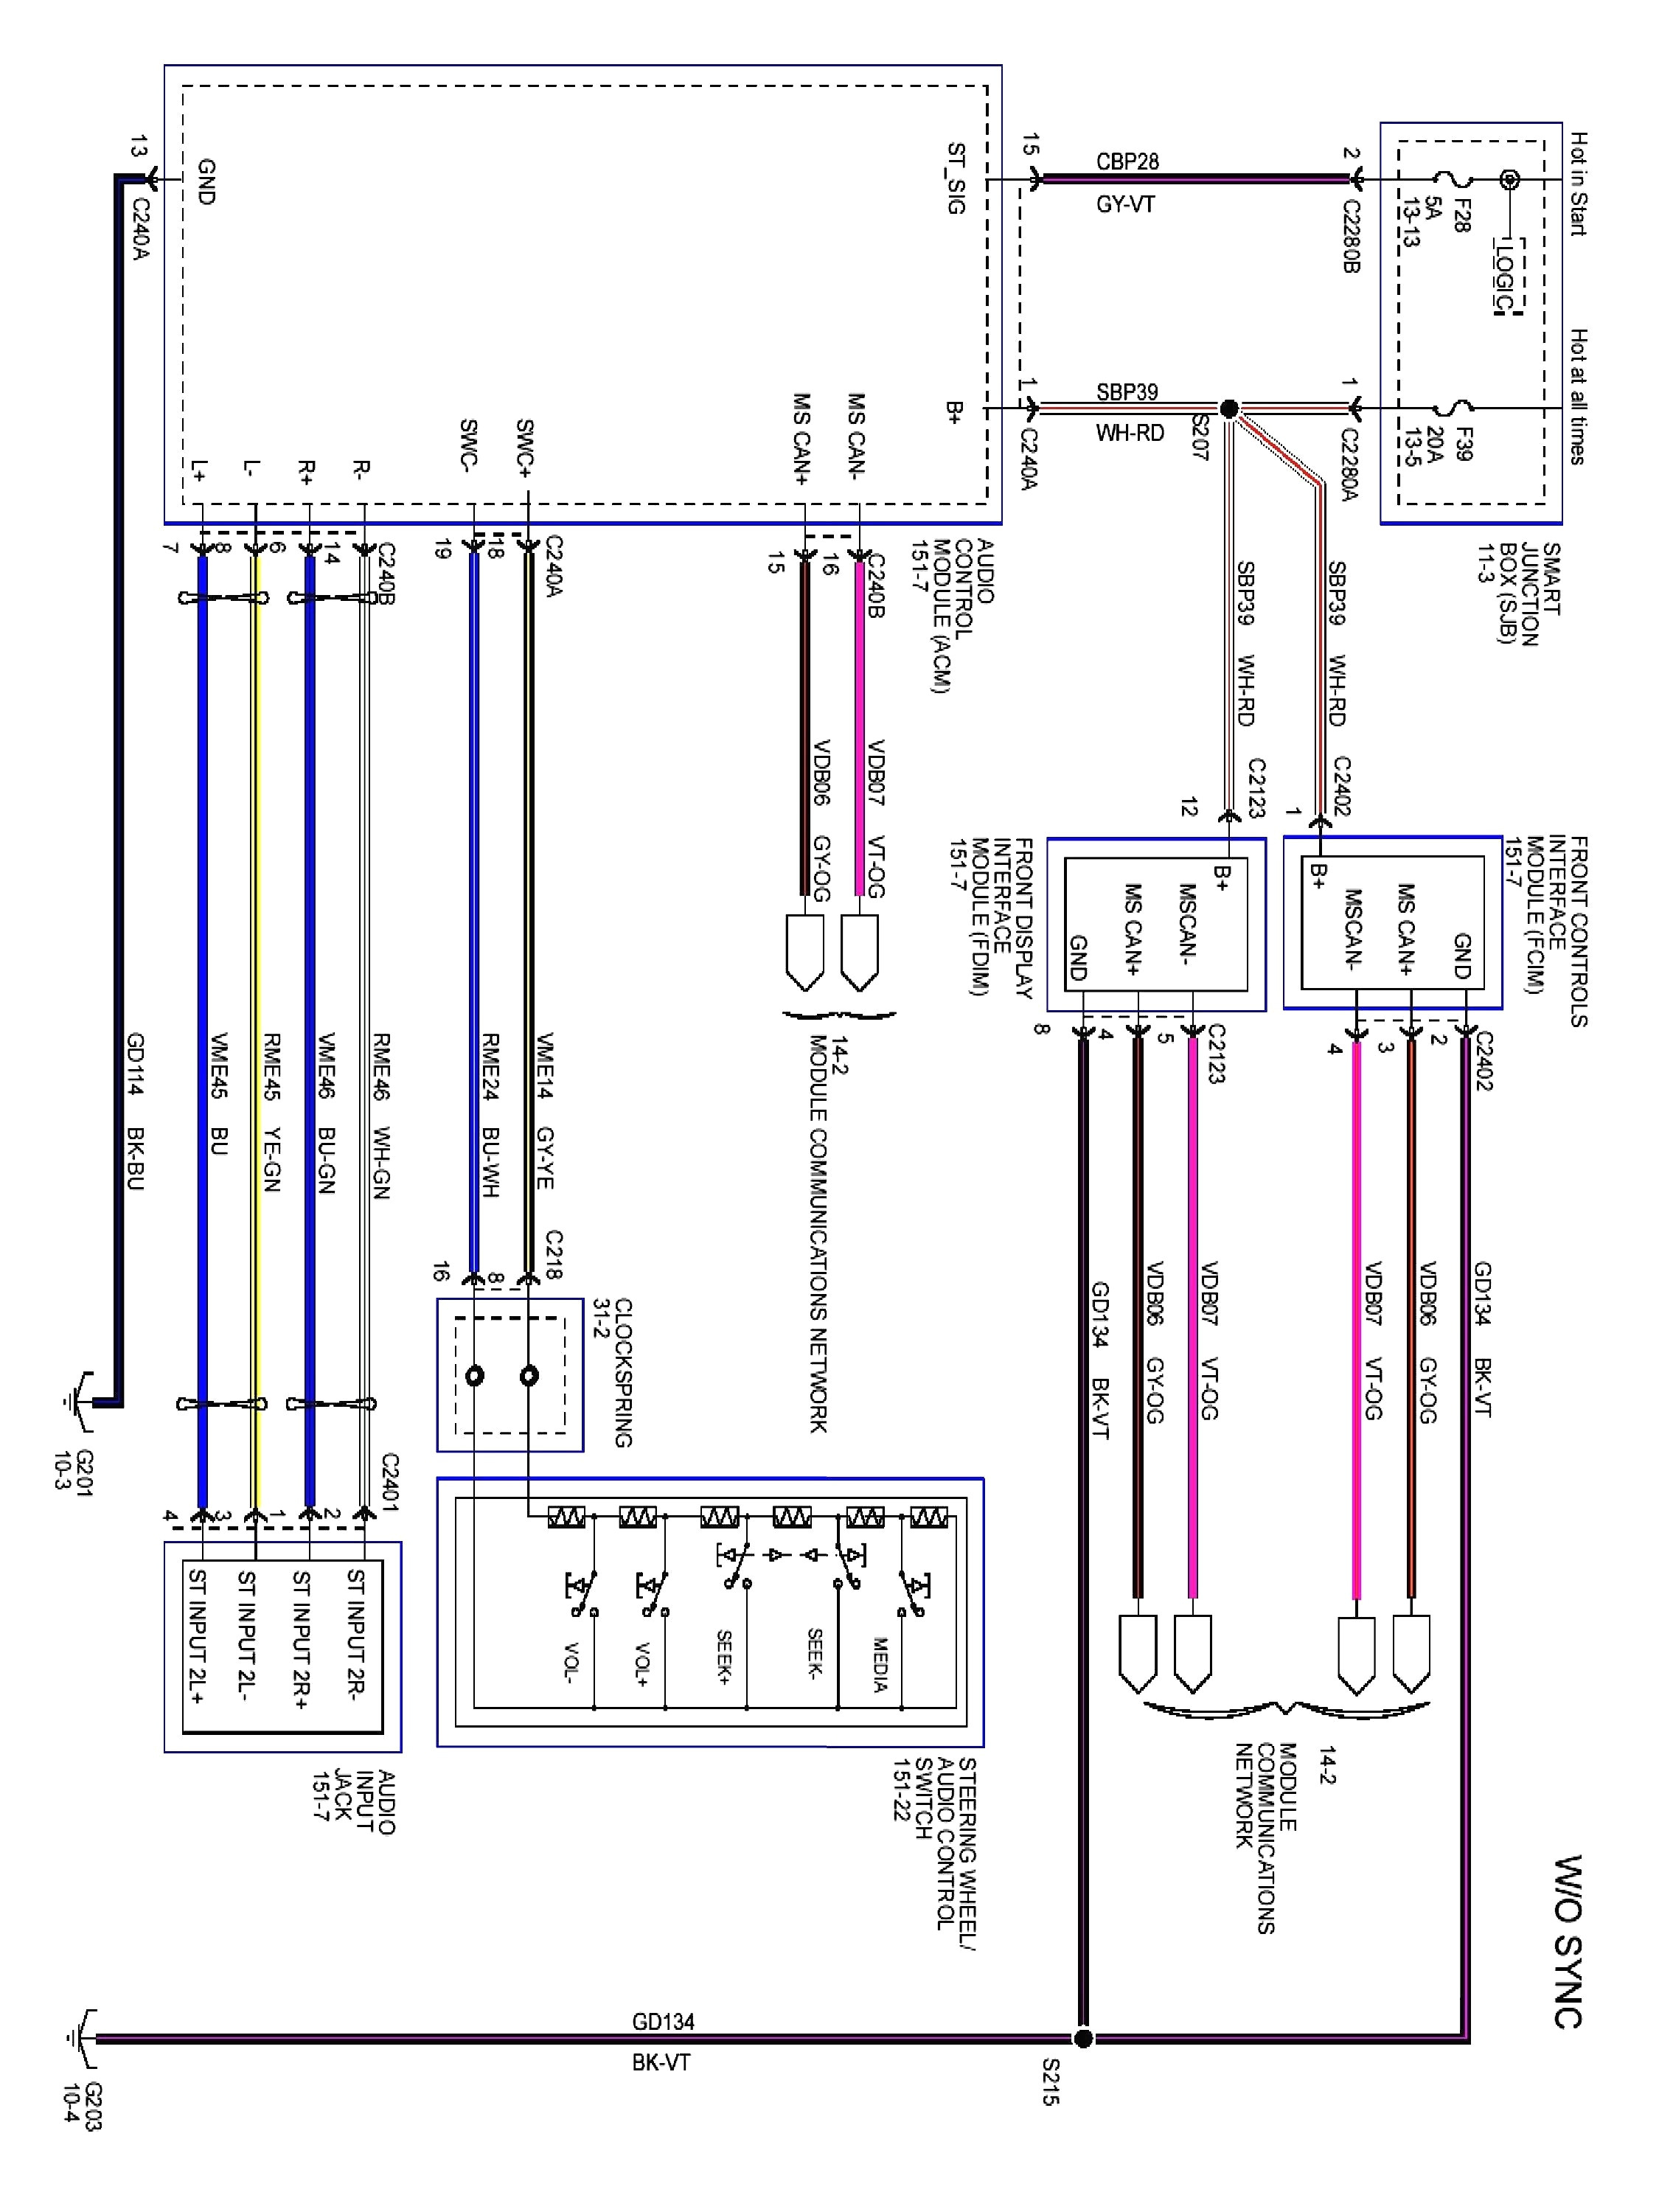 sub and amp wiring diagram fresh wiring diagram for amplifier car stereo best amplifier wiring